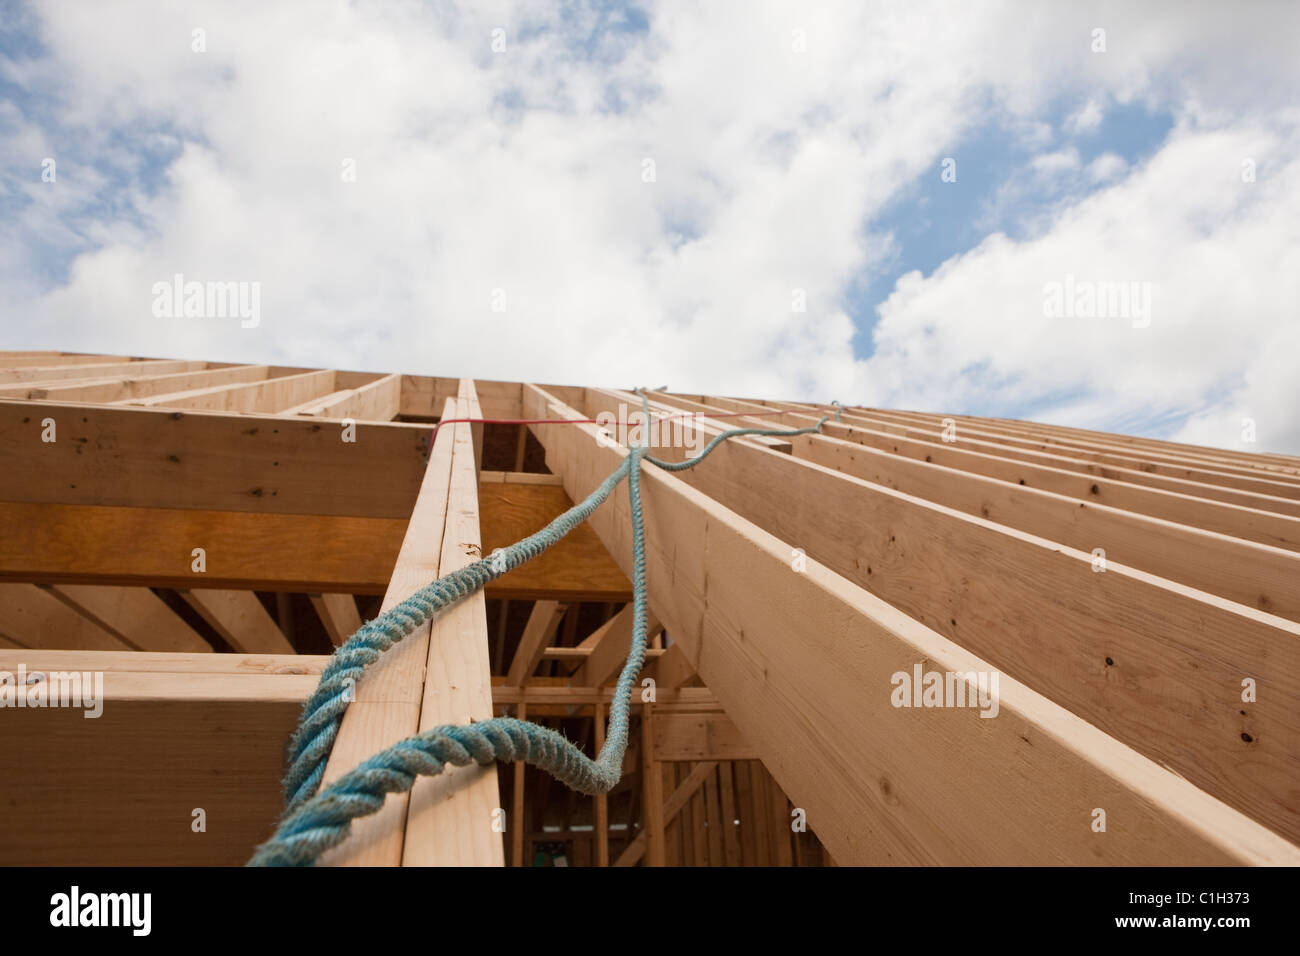 Safety ropes hanging from roof trusses at a house under construction Stock Photo